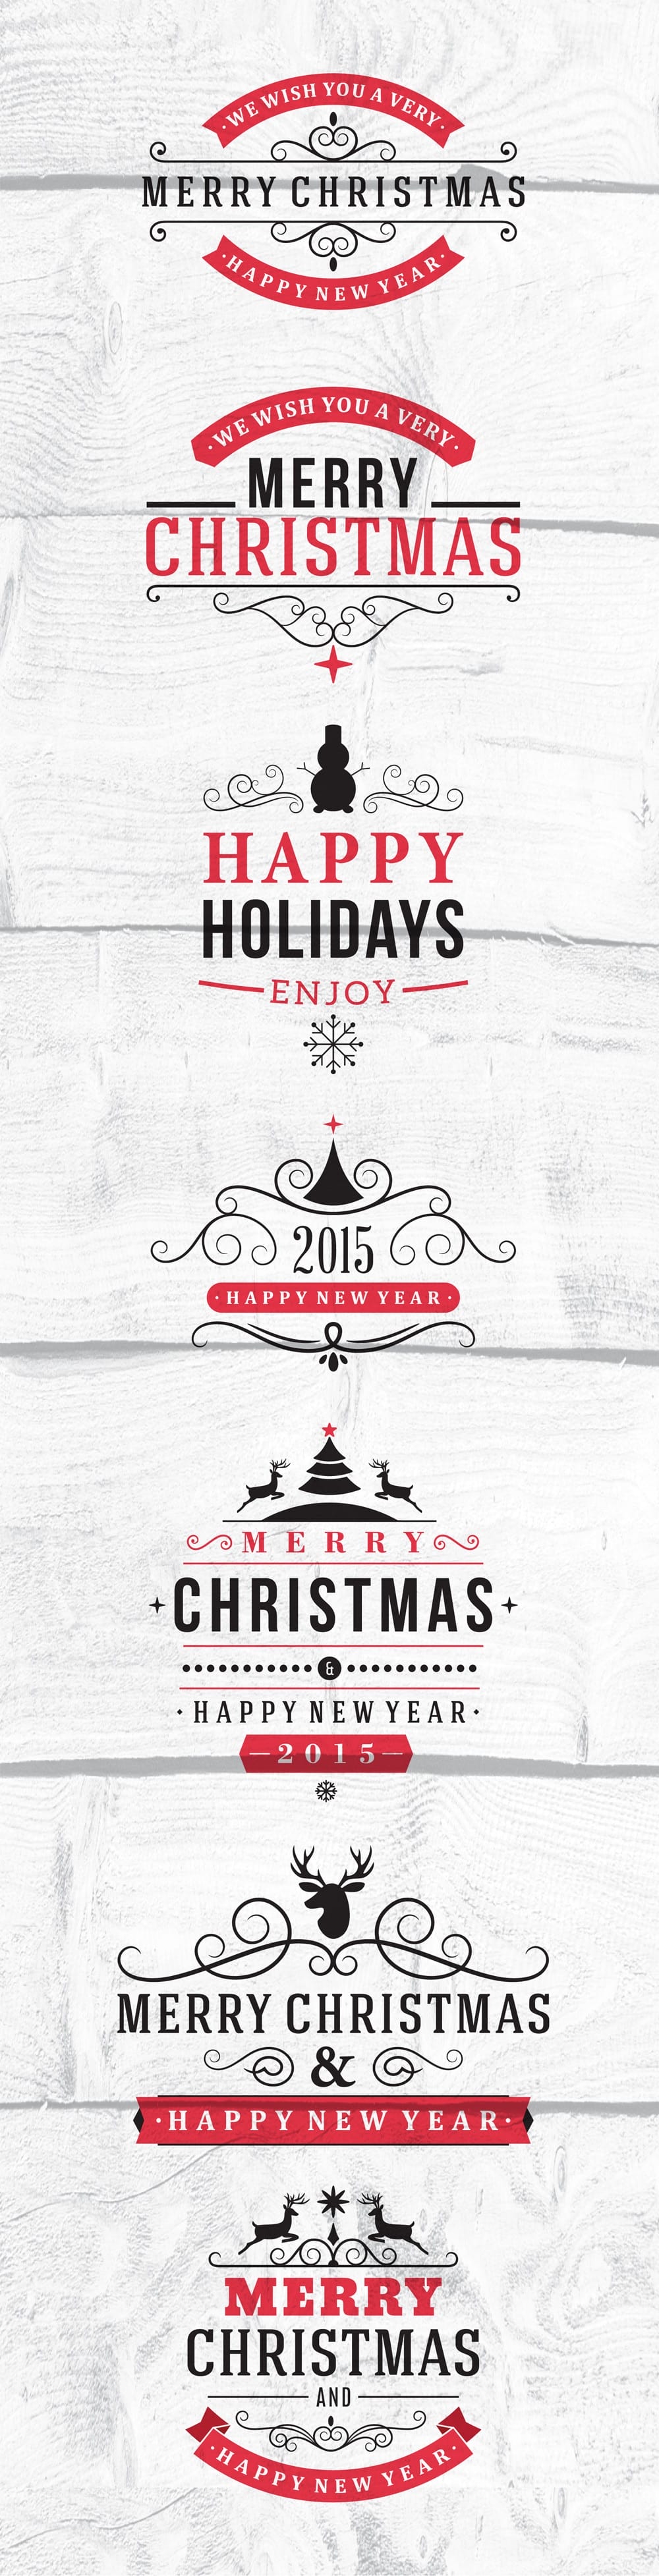 Free Christmas Calligraphic and Typographic Design Vector